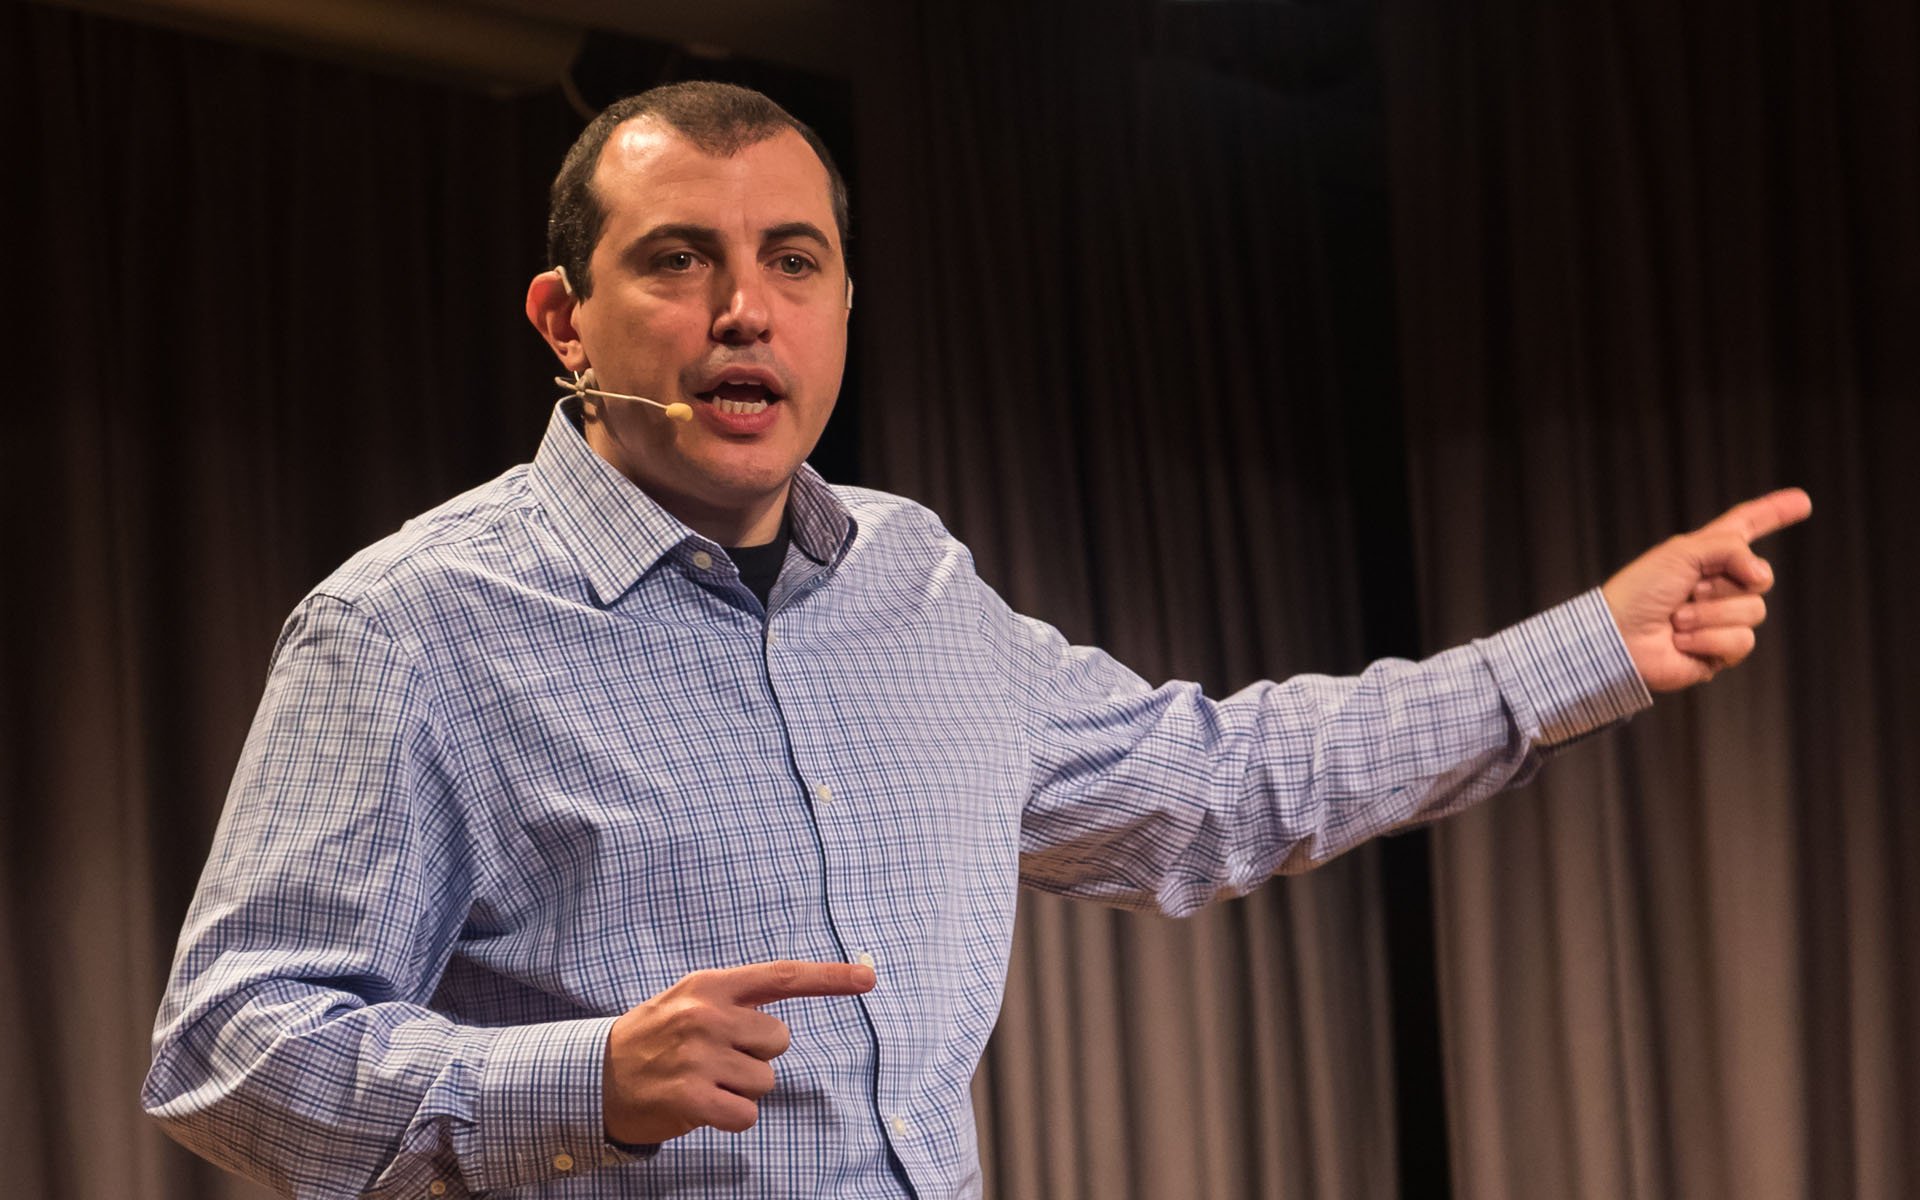 The New Bitcoin Jesus? Ver Triggers $700k in Bitcoin Donations To Antonopoulos